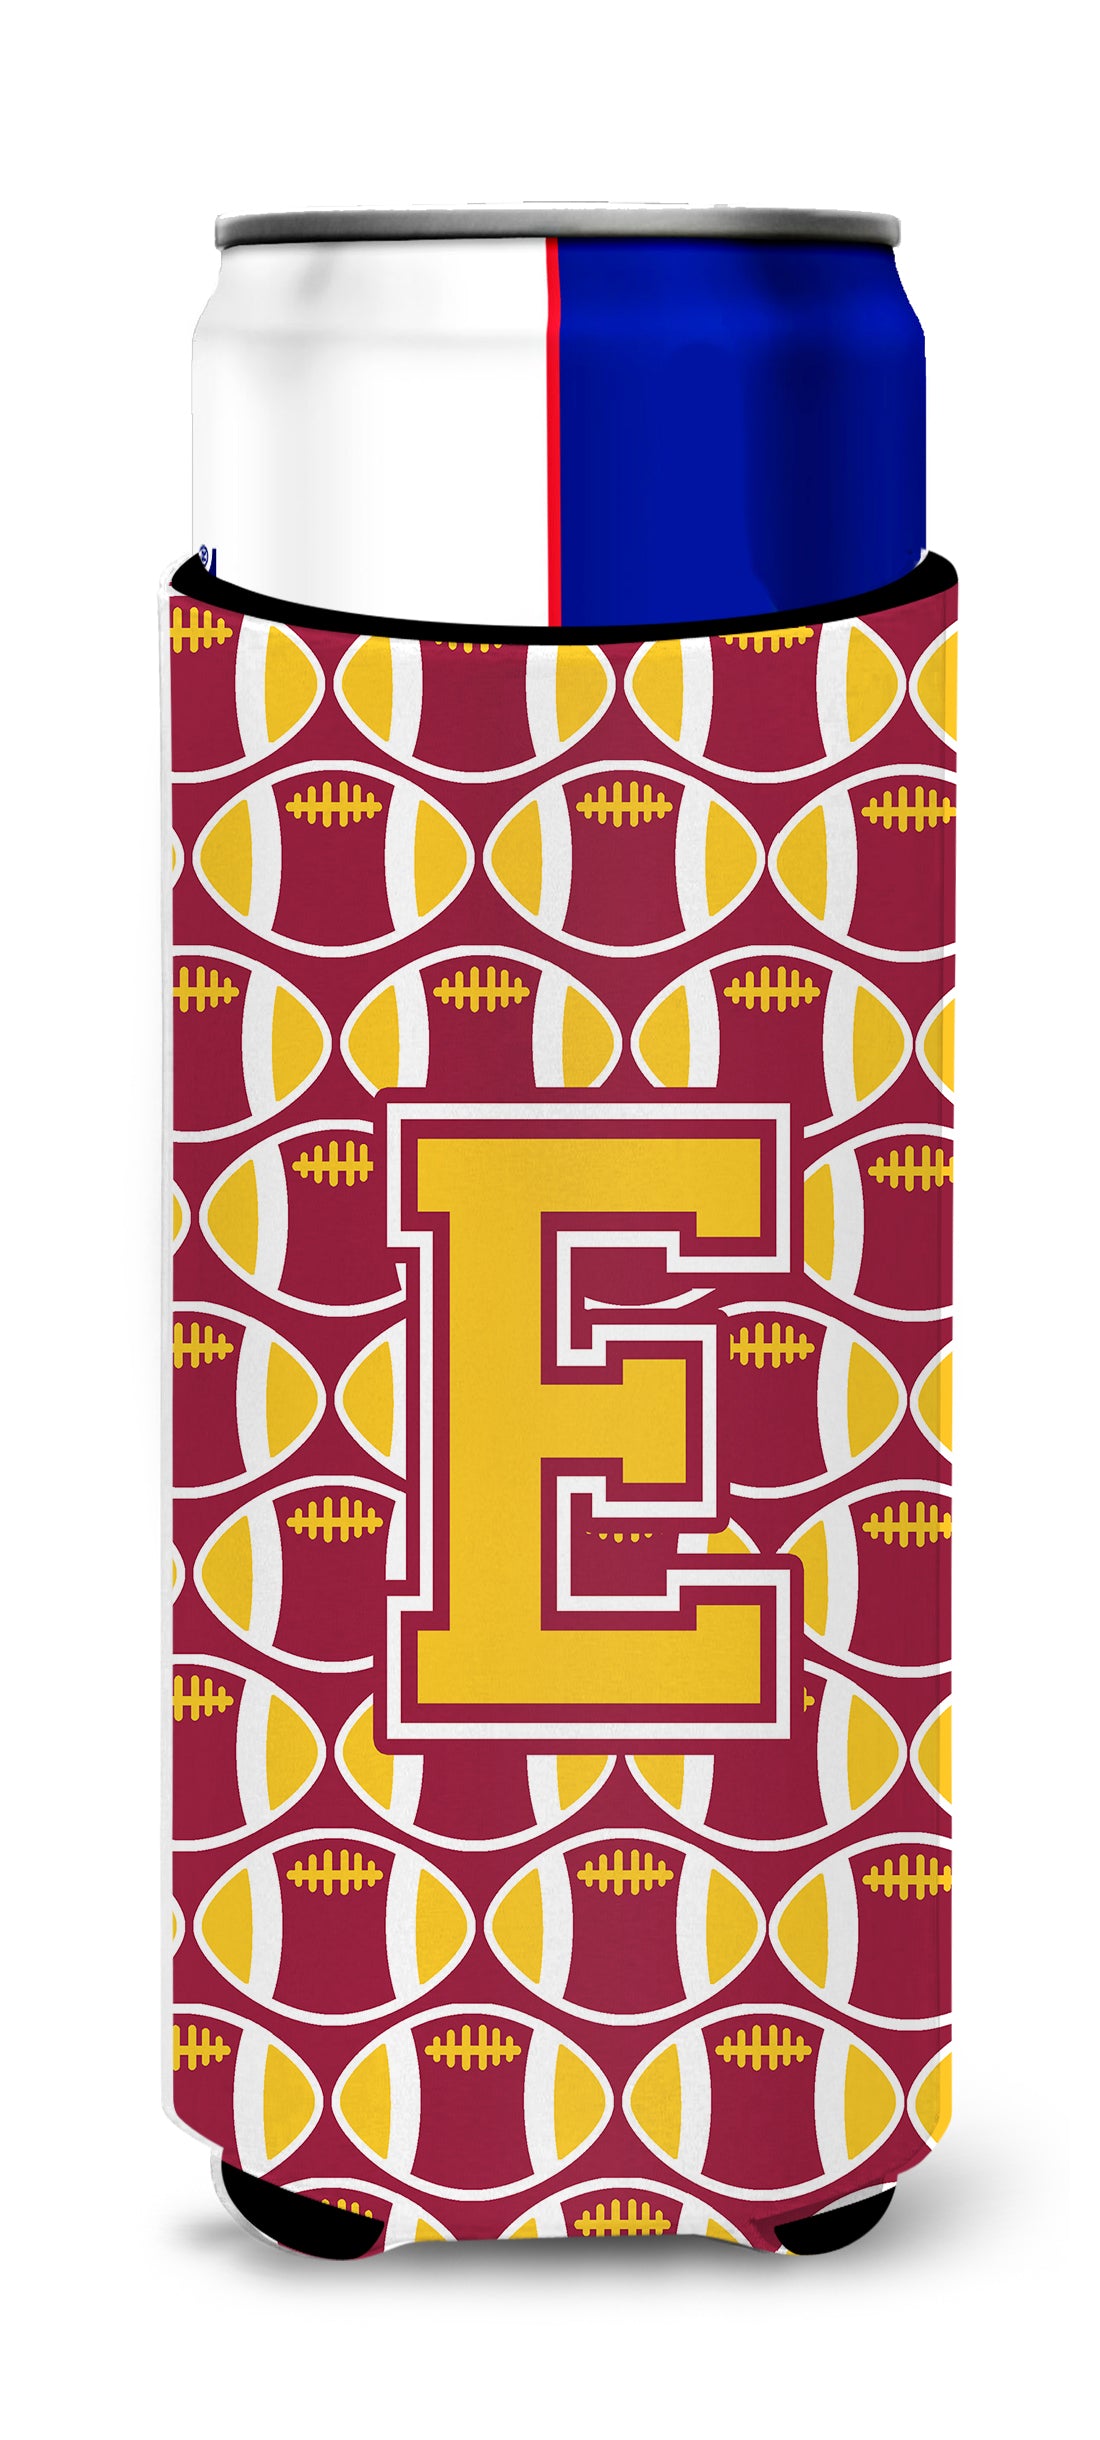 Letter E Football Maroon and Gold Ultra Beverage Insulators for slim cans CJ1081-EMUK.